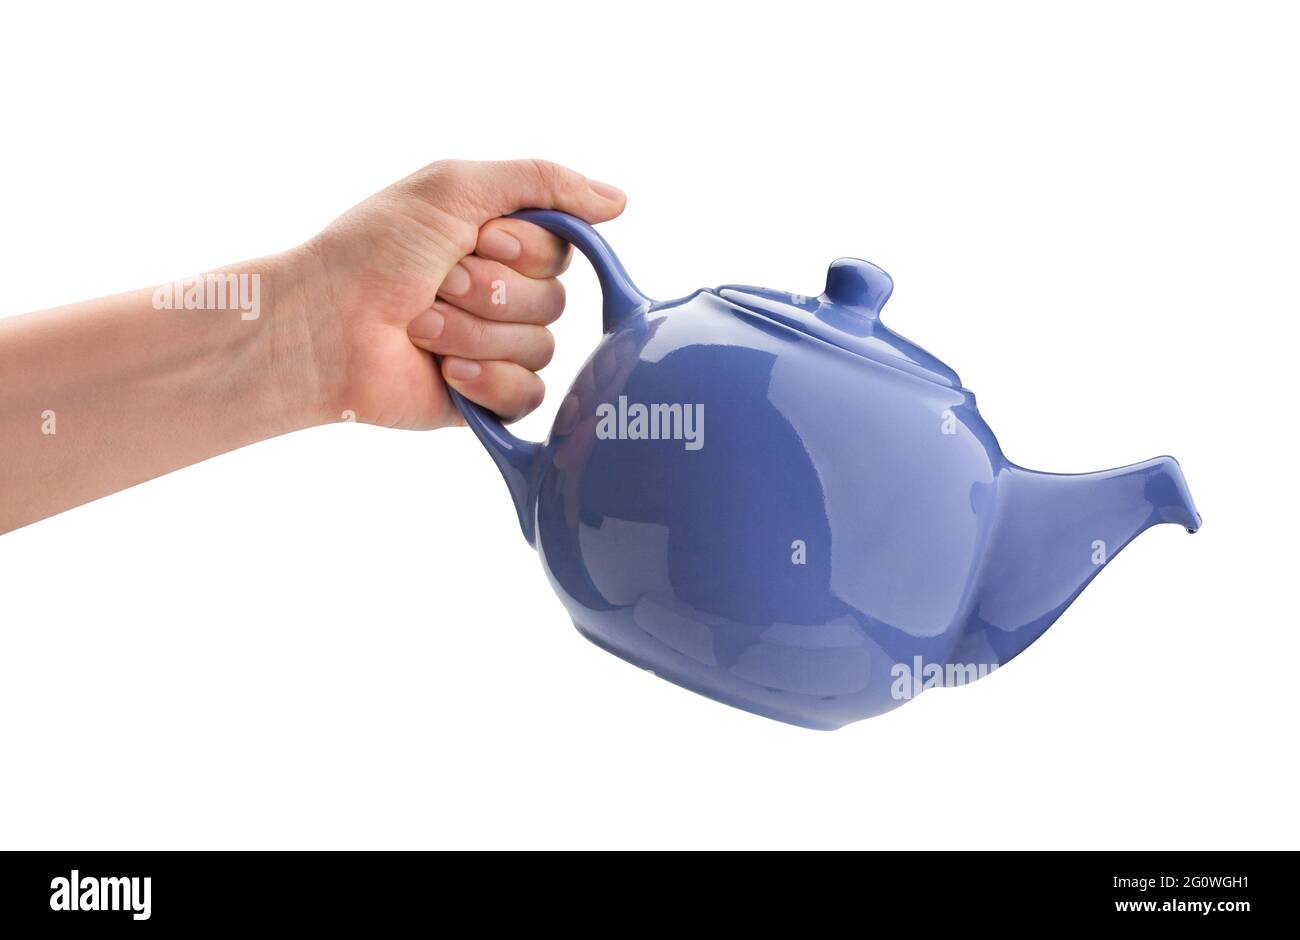 ceramic kettle in hand path isolated on white Stock Photo